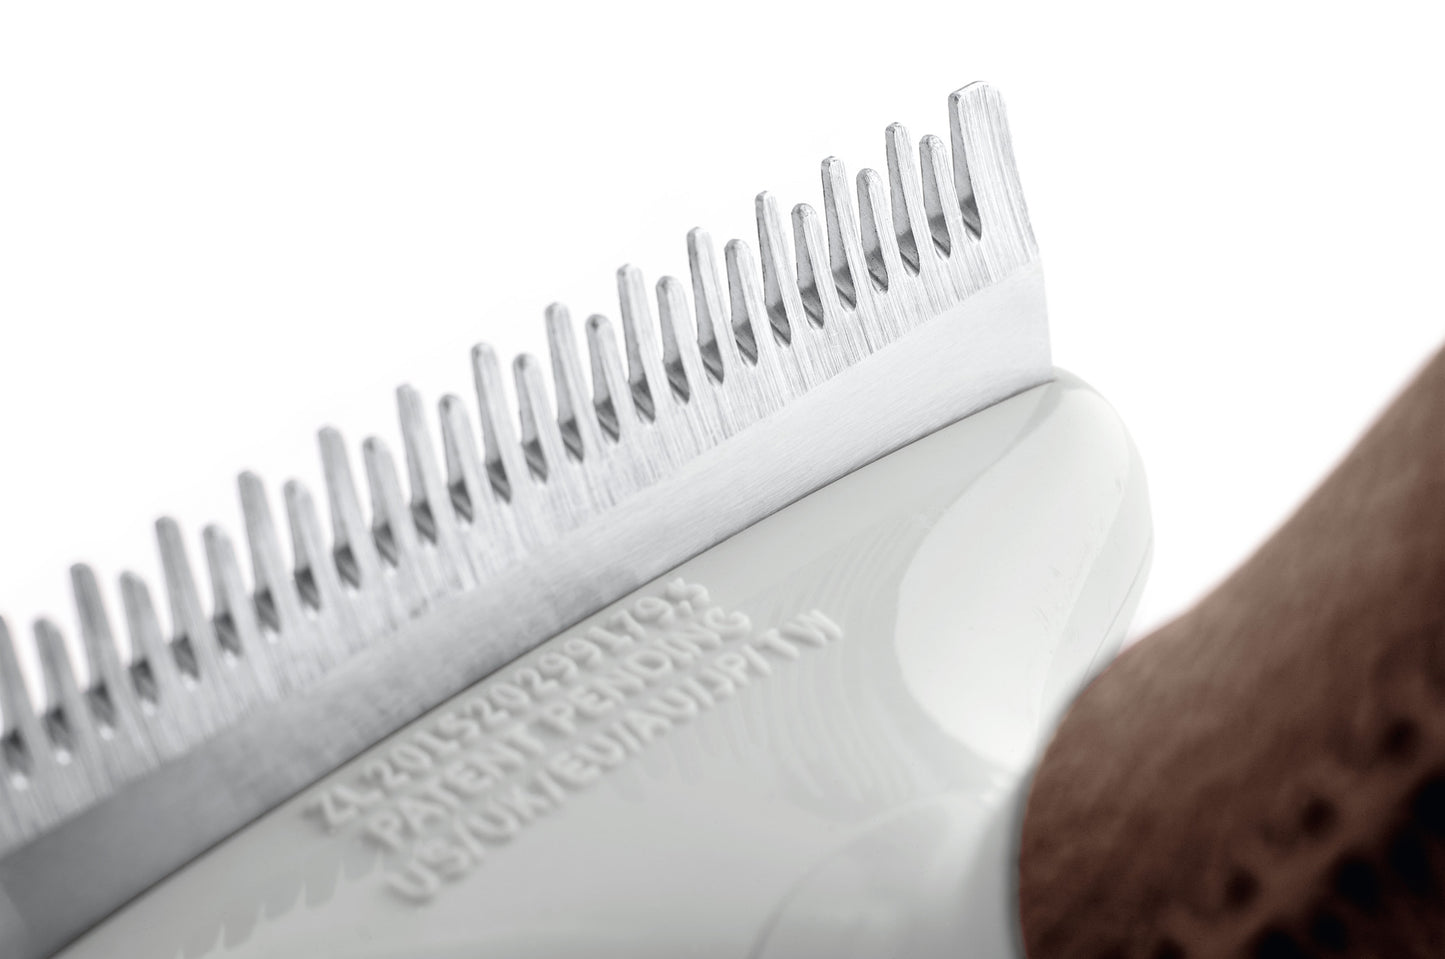 HUNTER® Stripping Spa CurryComb with Special blade